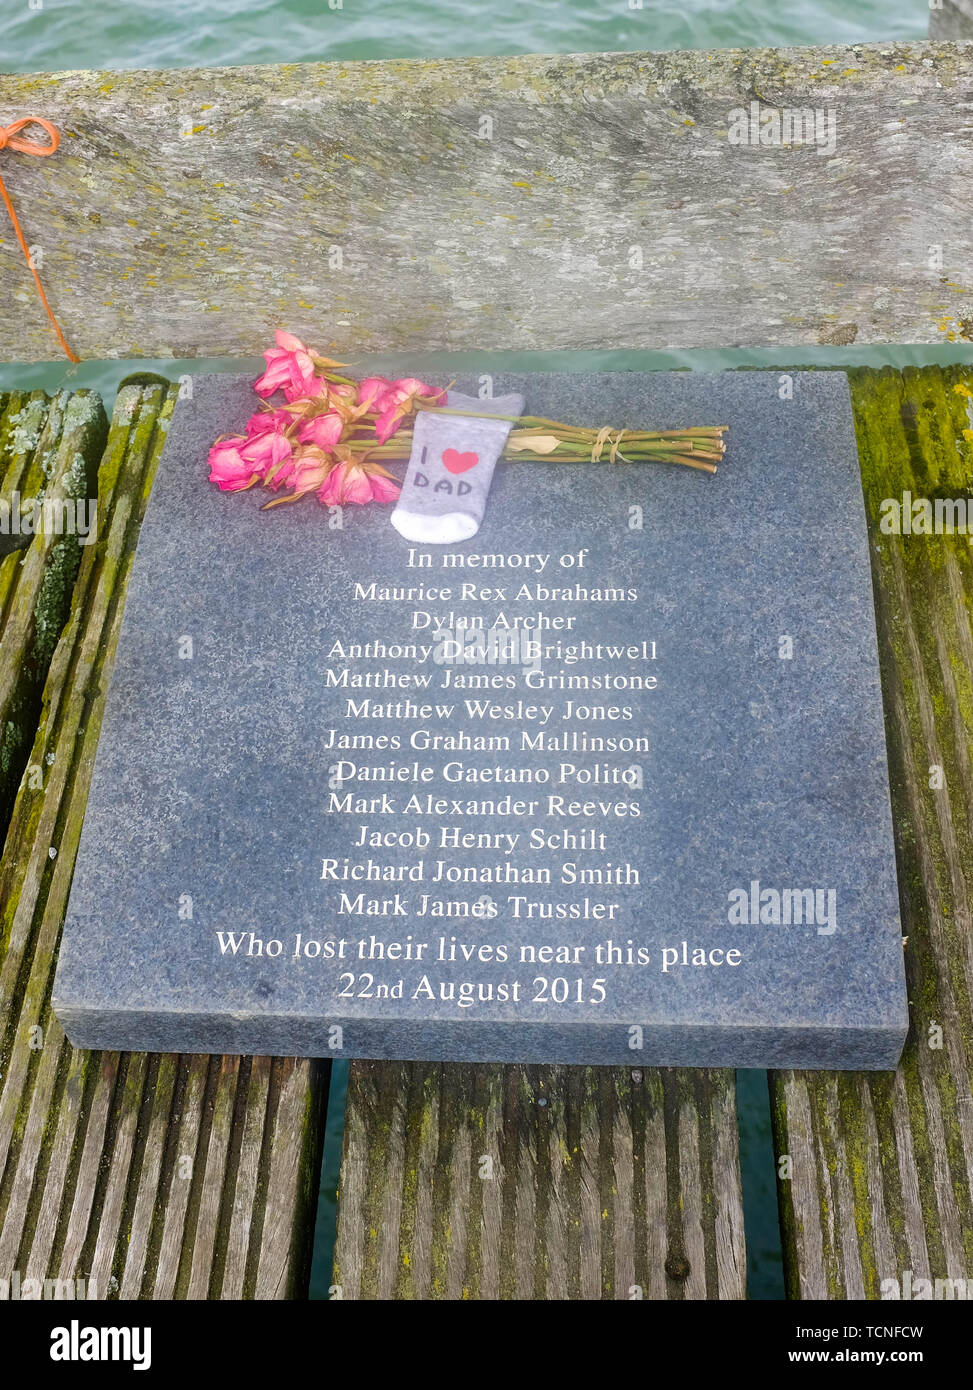 Memorial plaque commemorating the men who died when a Hawker Hunter jet crashed on to the A27 during an air display at Shoreham Airport in August 2015 Stock Photo